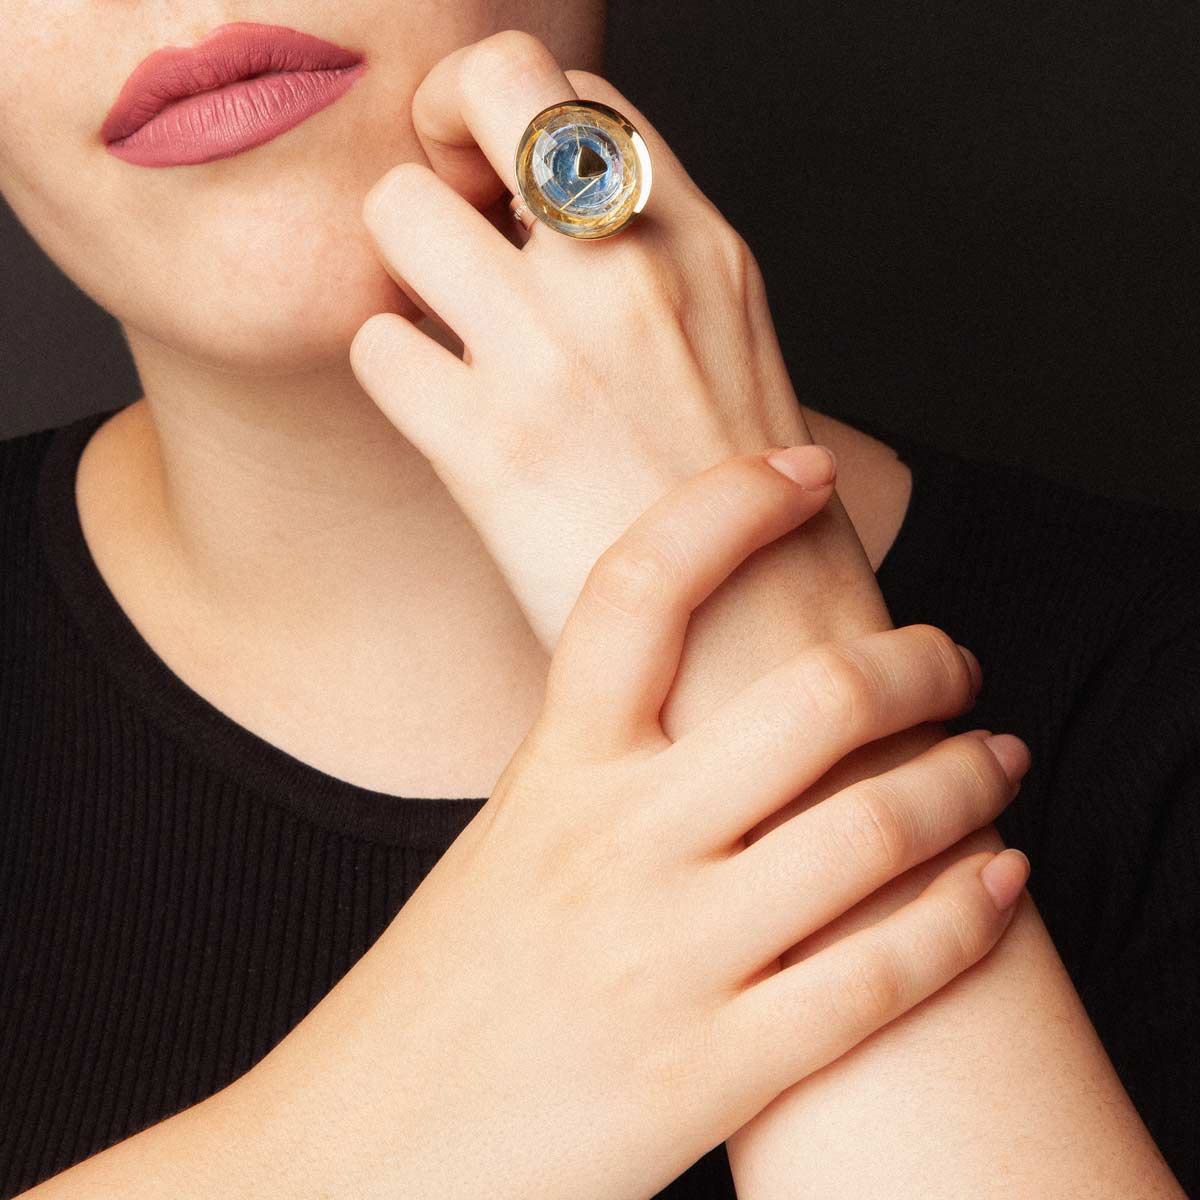 Poa handmade ring in 9k or 18k gold, sterling silver and rutilated quartz and blue agate doublet designed by Belen Bajo m1